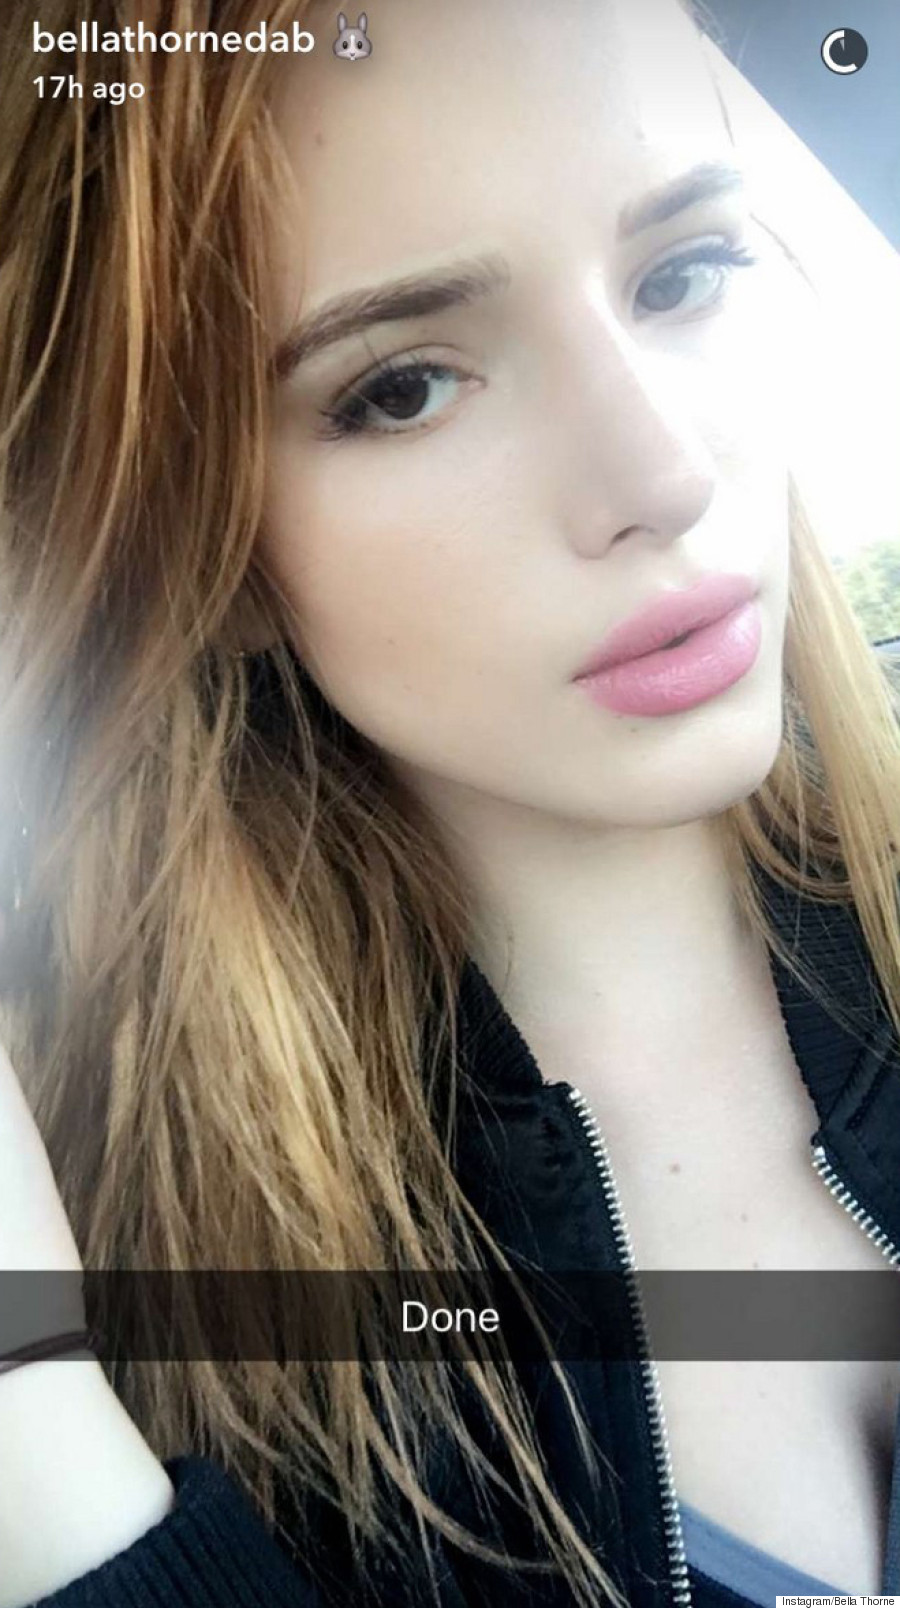 Bella thorne snapchat pictures